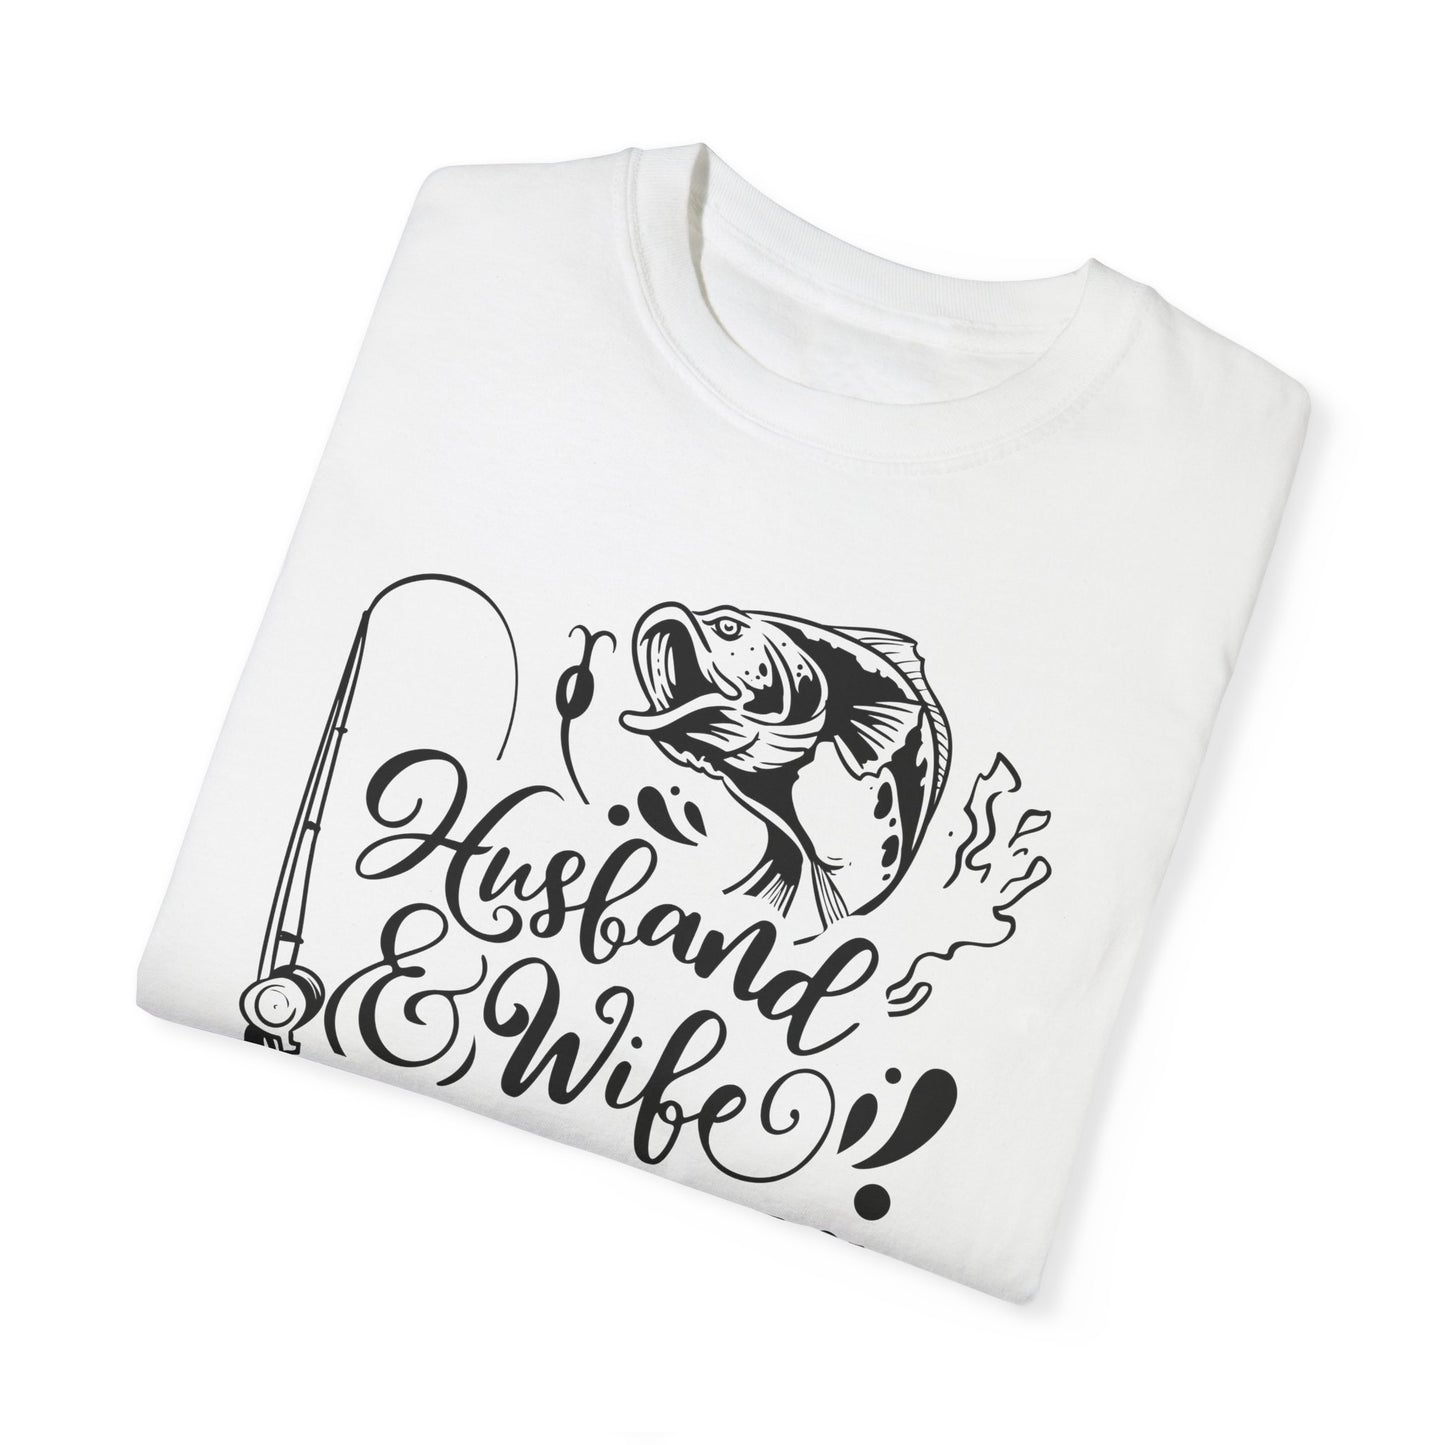 Husband and wife for life: Unisex Garment-Dyed T-shirt